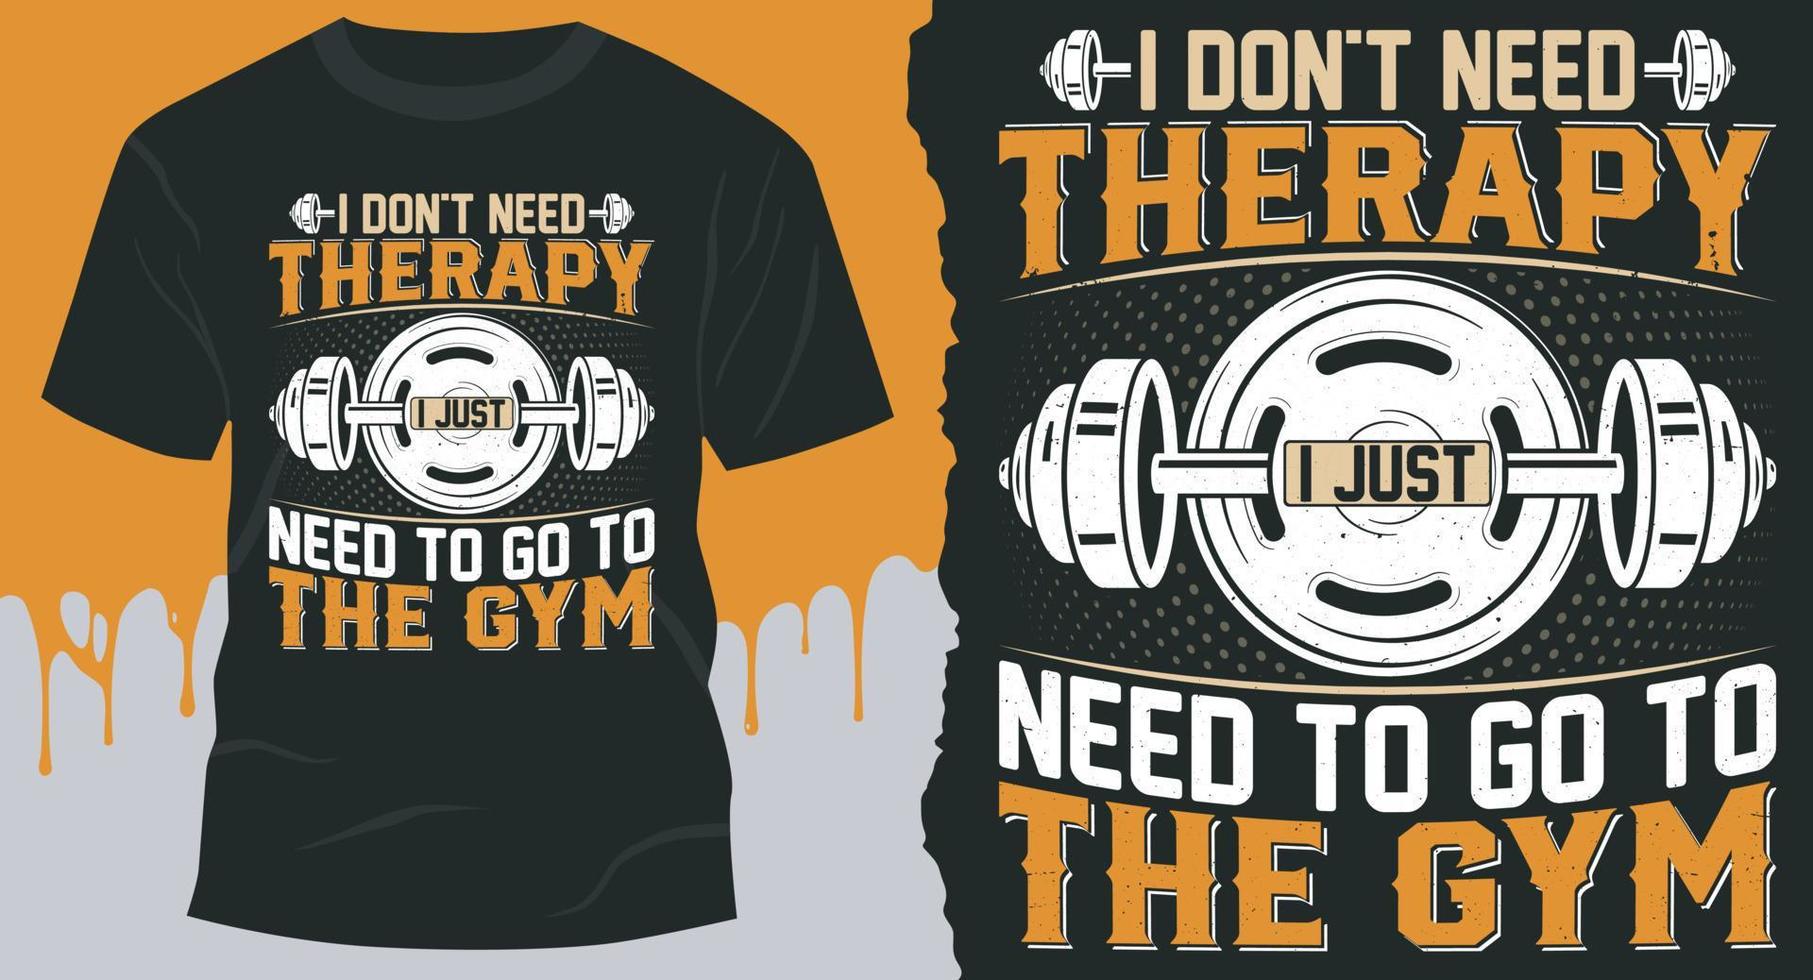 I Don't Need Therapy I Just Need to Go to the Gym. Best Vector Design for Workout T-Shirt